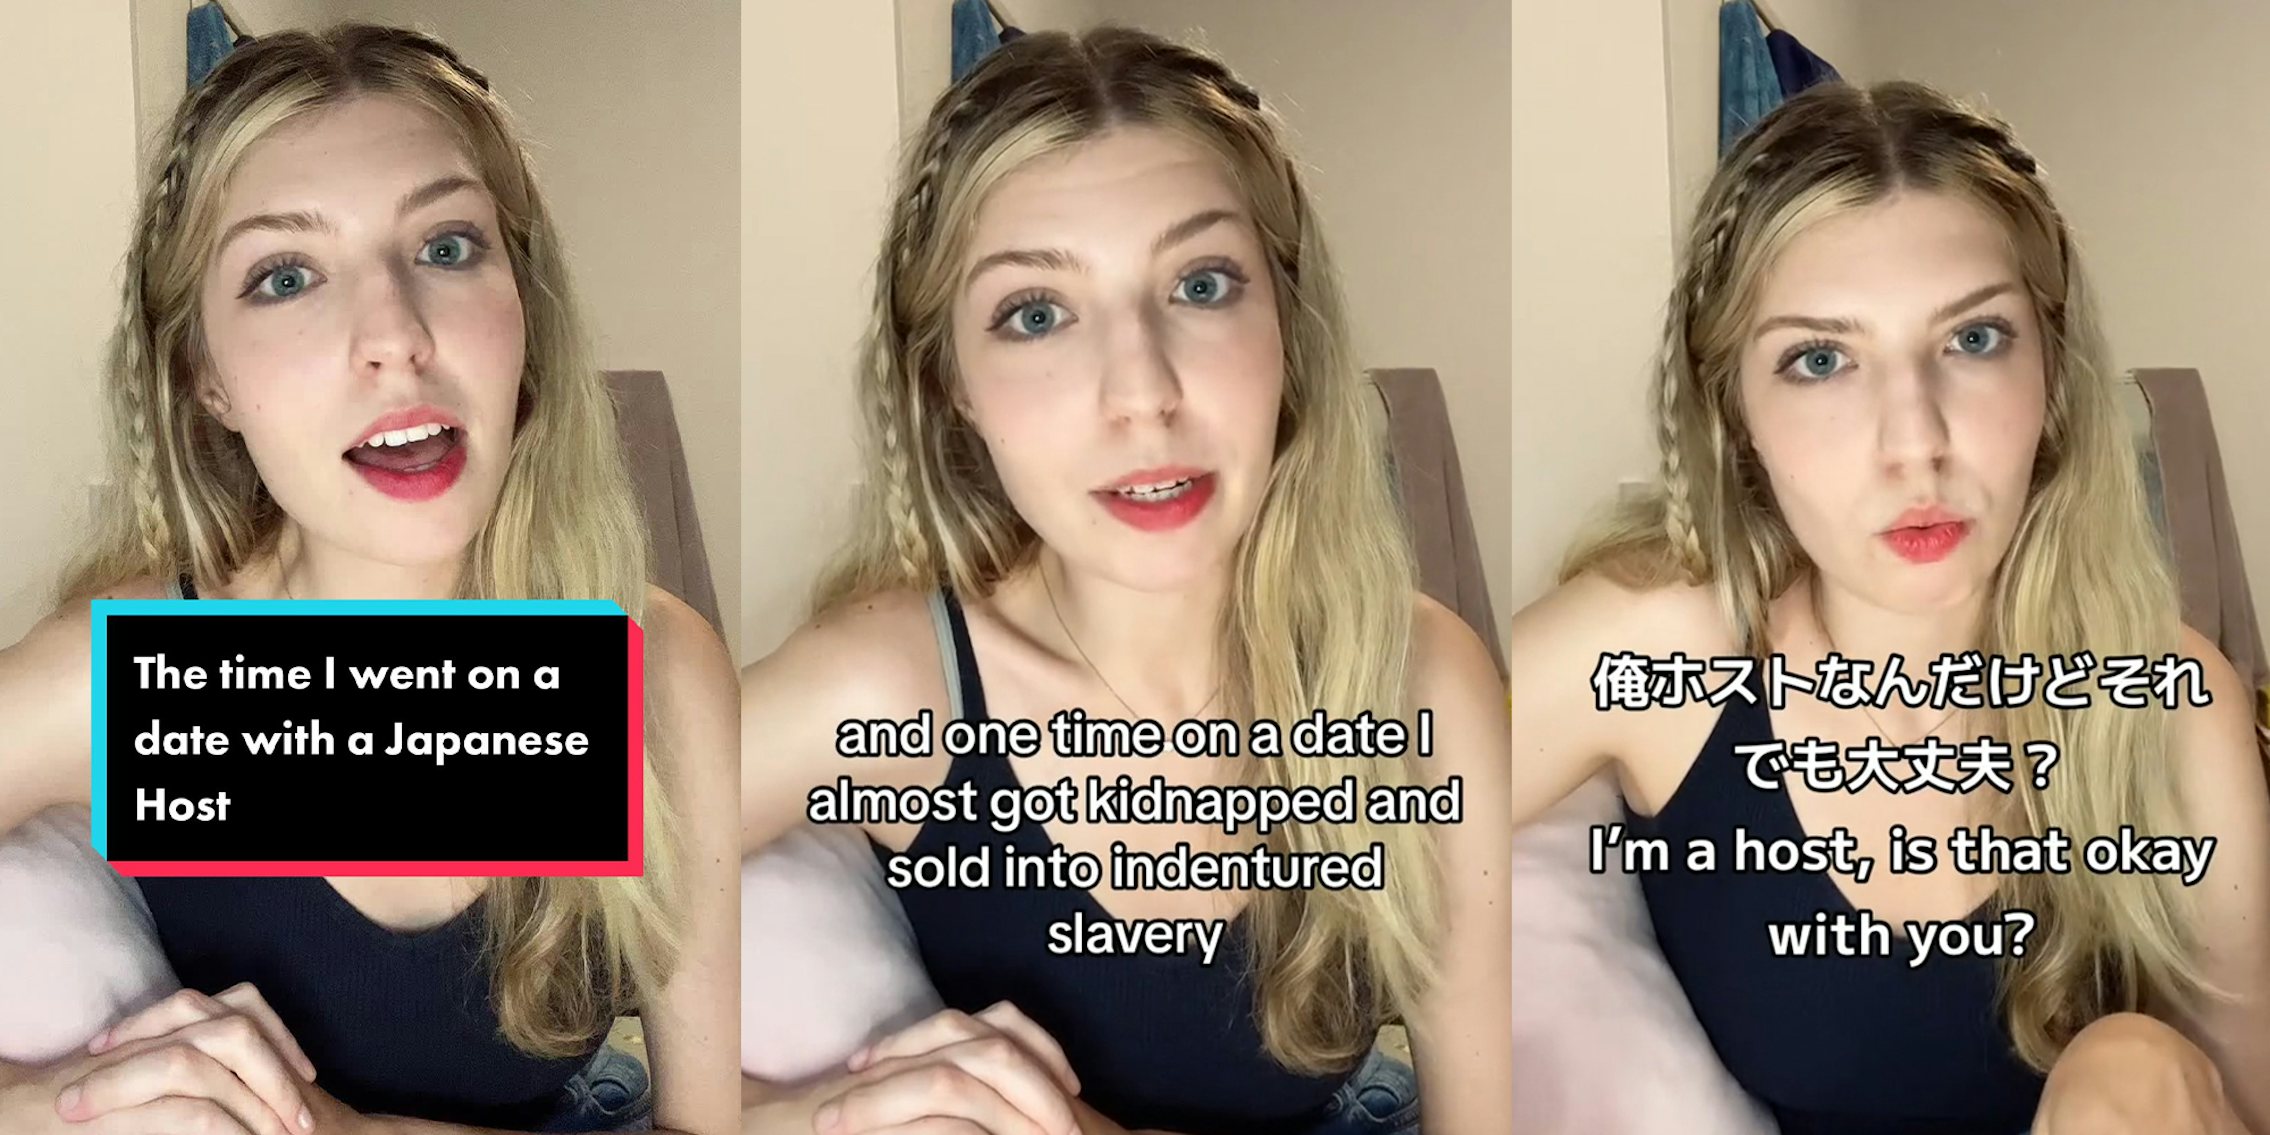 Tinder user shares PSA for tourists about Japanese 'host clubs'